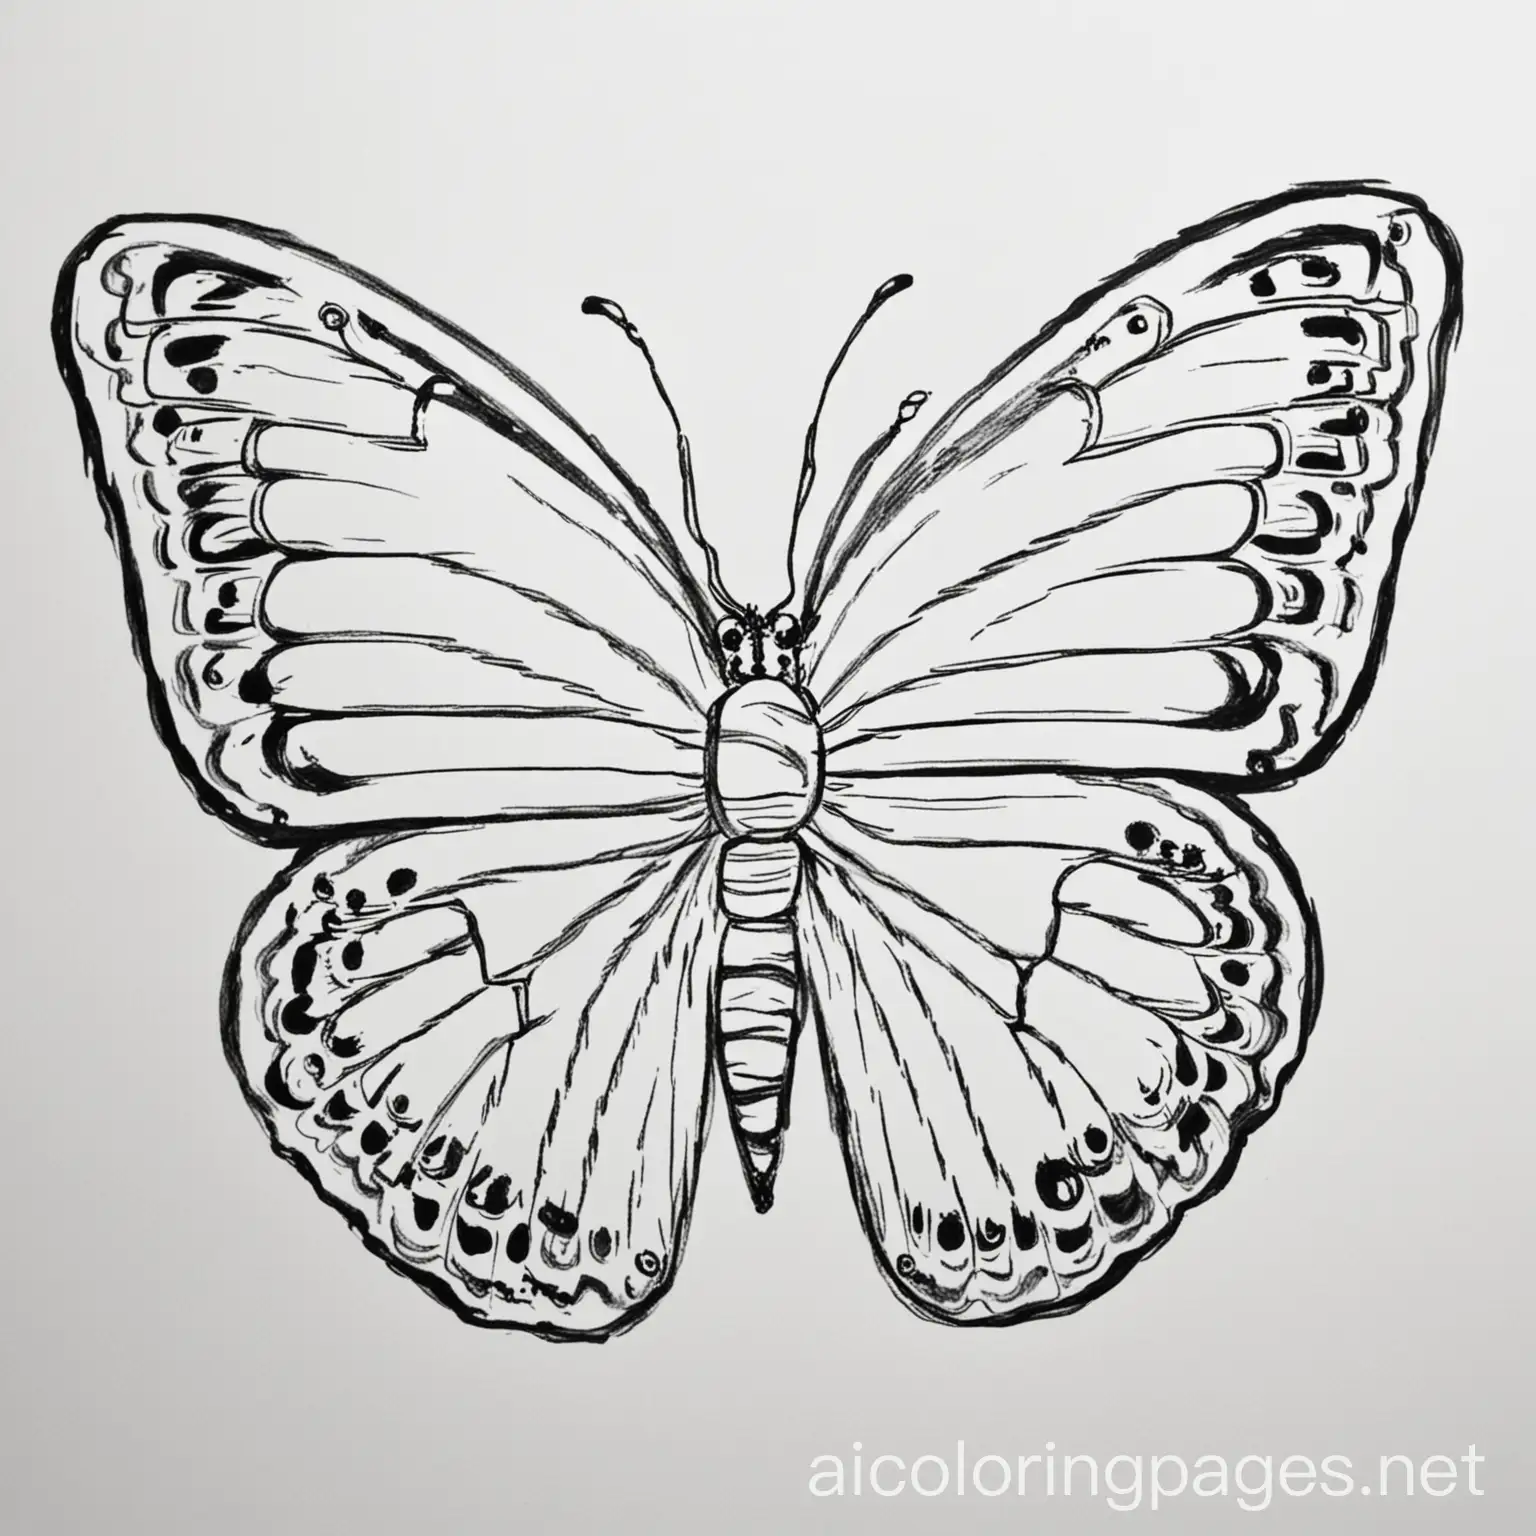 Butterfly-Coloring-Page-with-Simple-Line-Art-on-White-Background